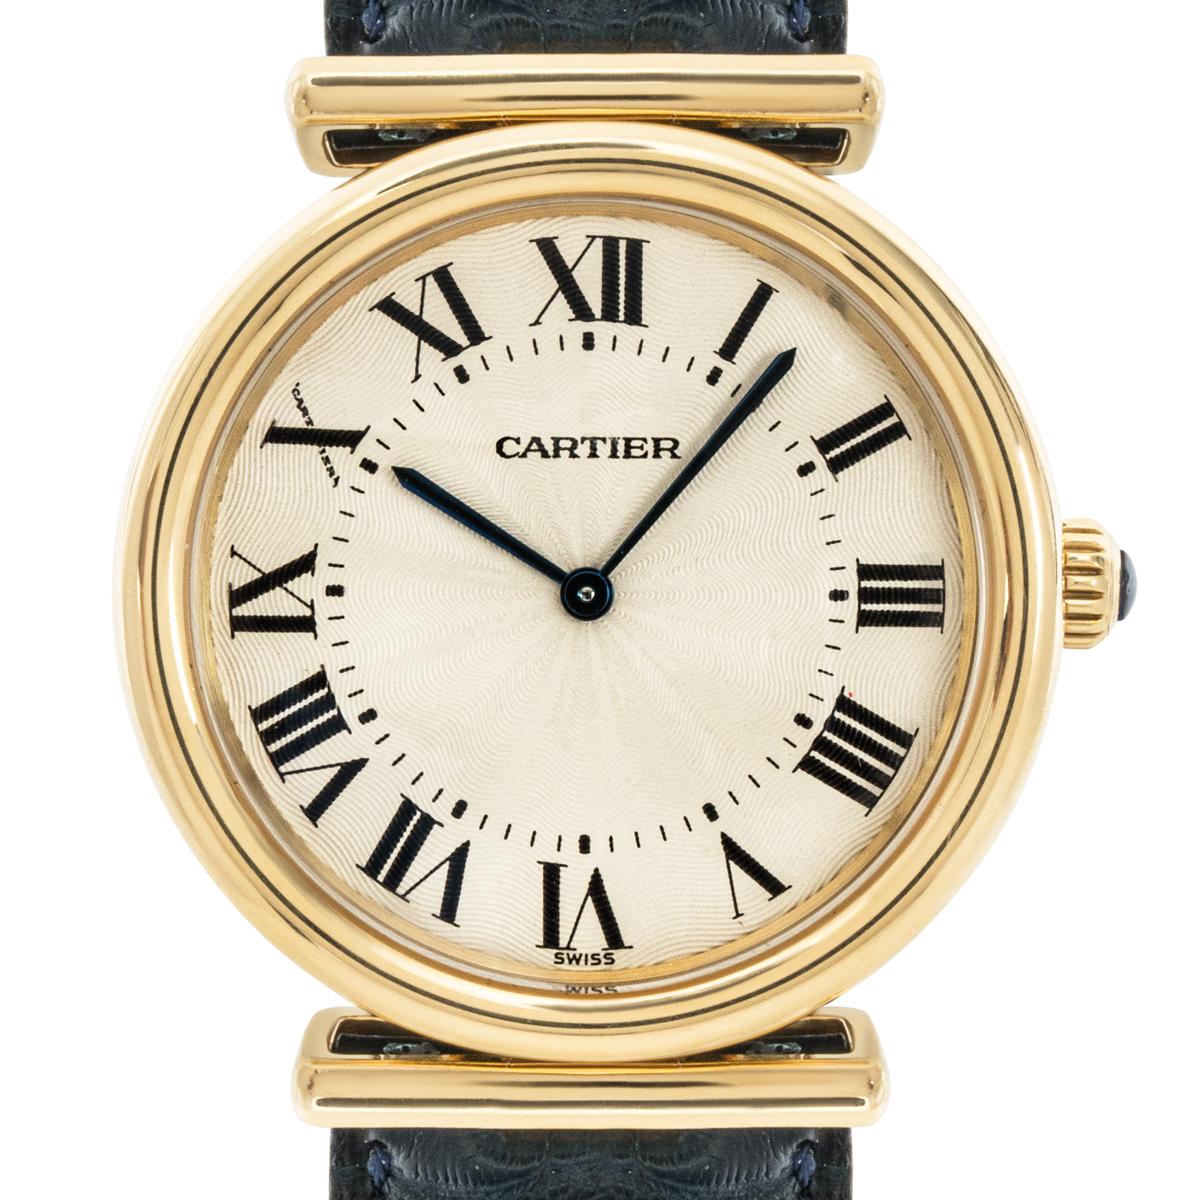 A yellow gold Vendome Bi-Plan wristwatch by Cartier. Featuring a silver guilloche dial with roman numerals, a secret Cartier signature at 